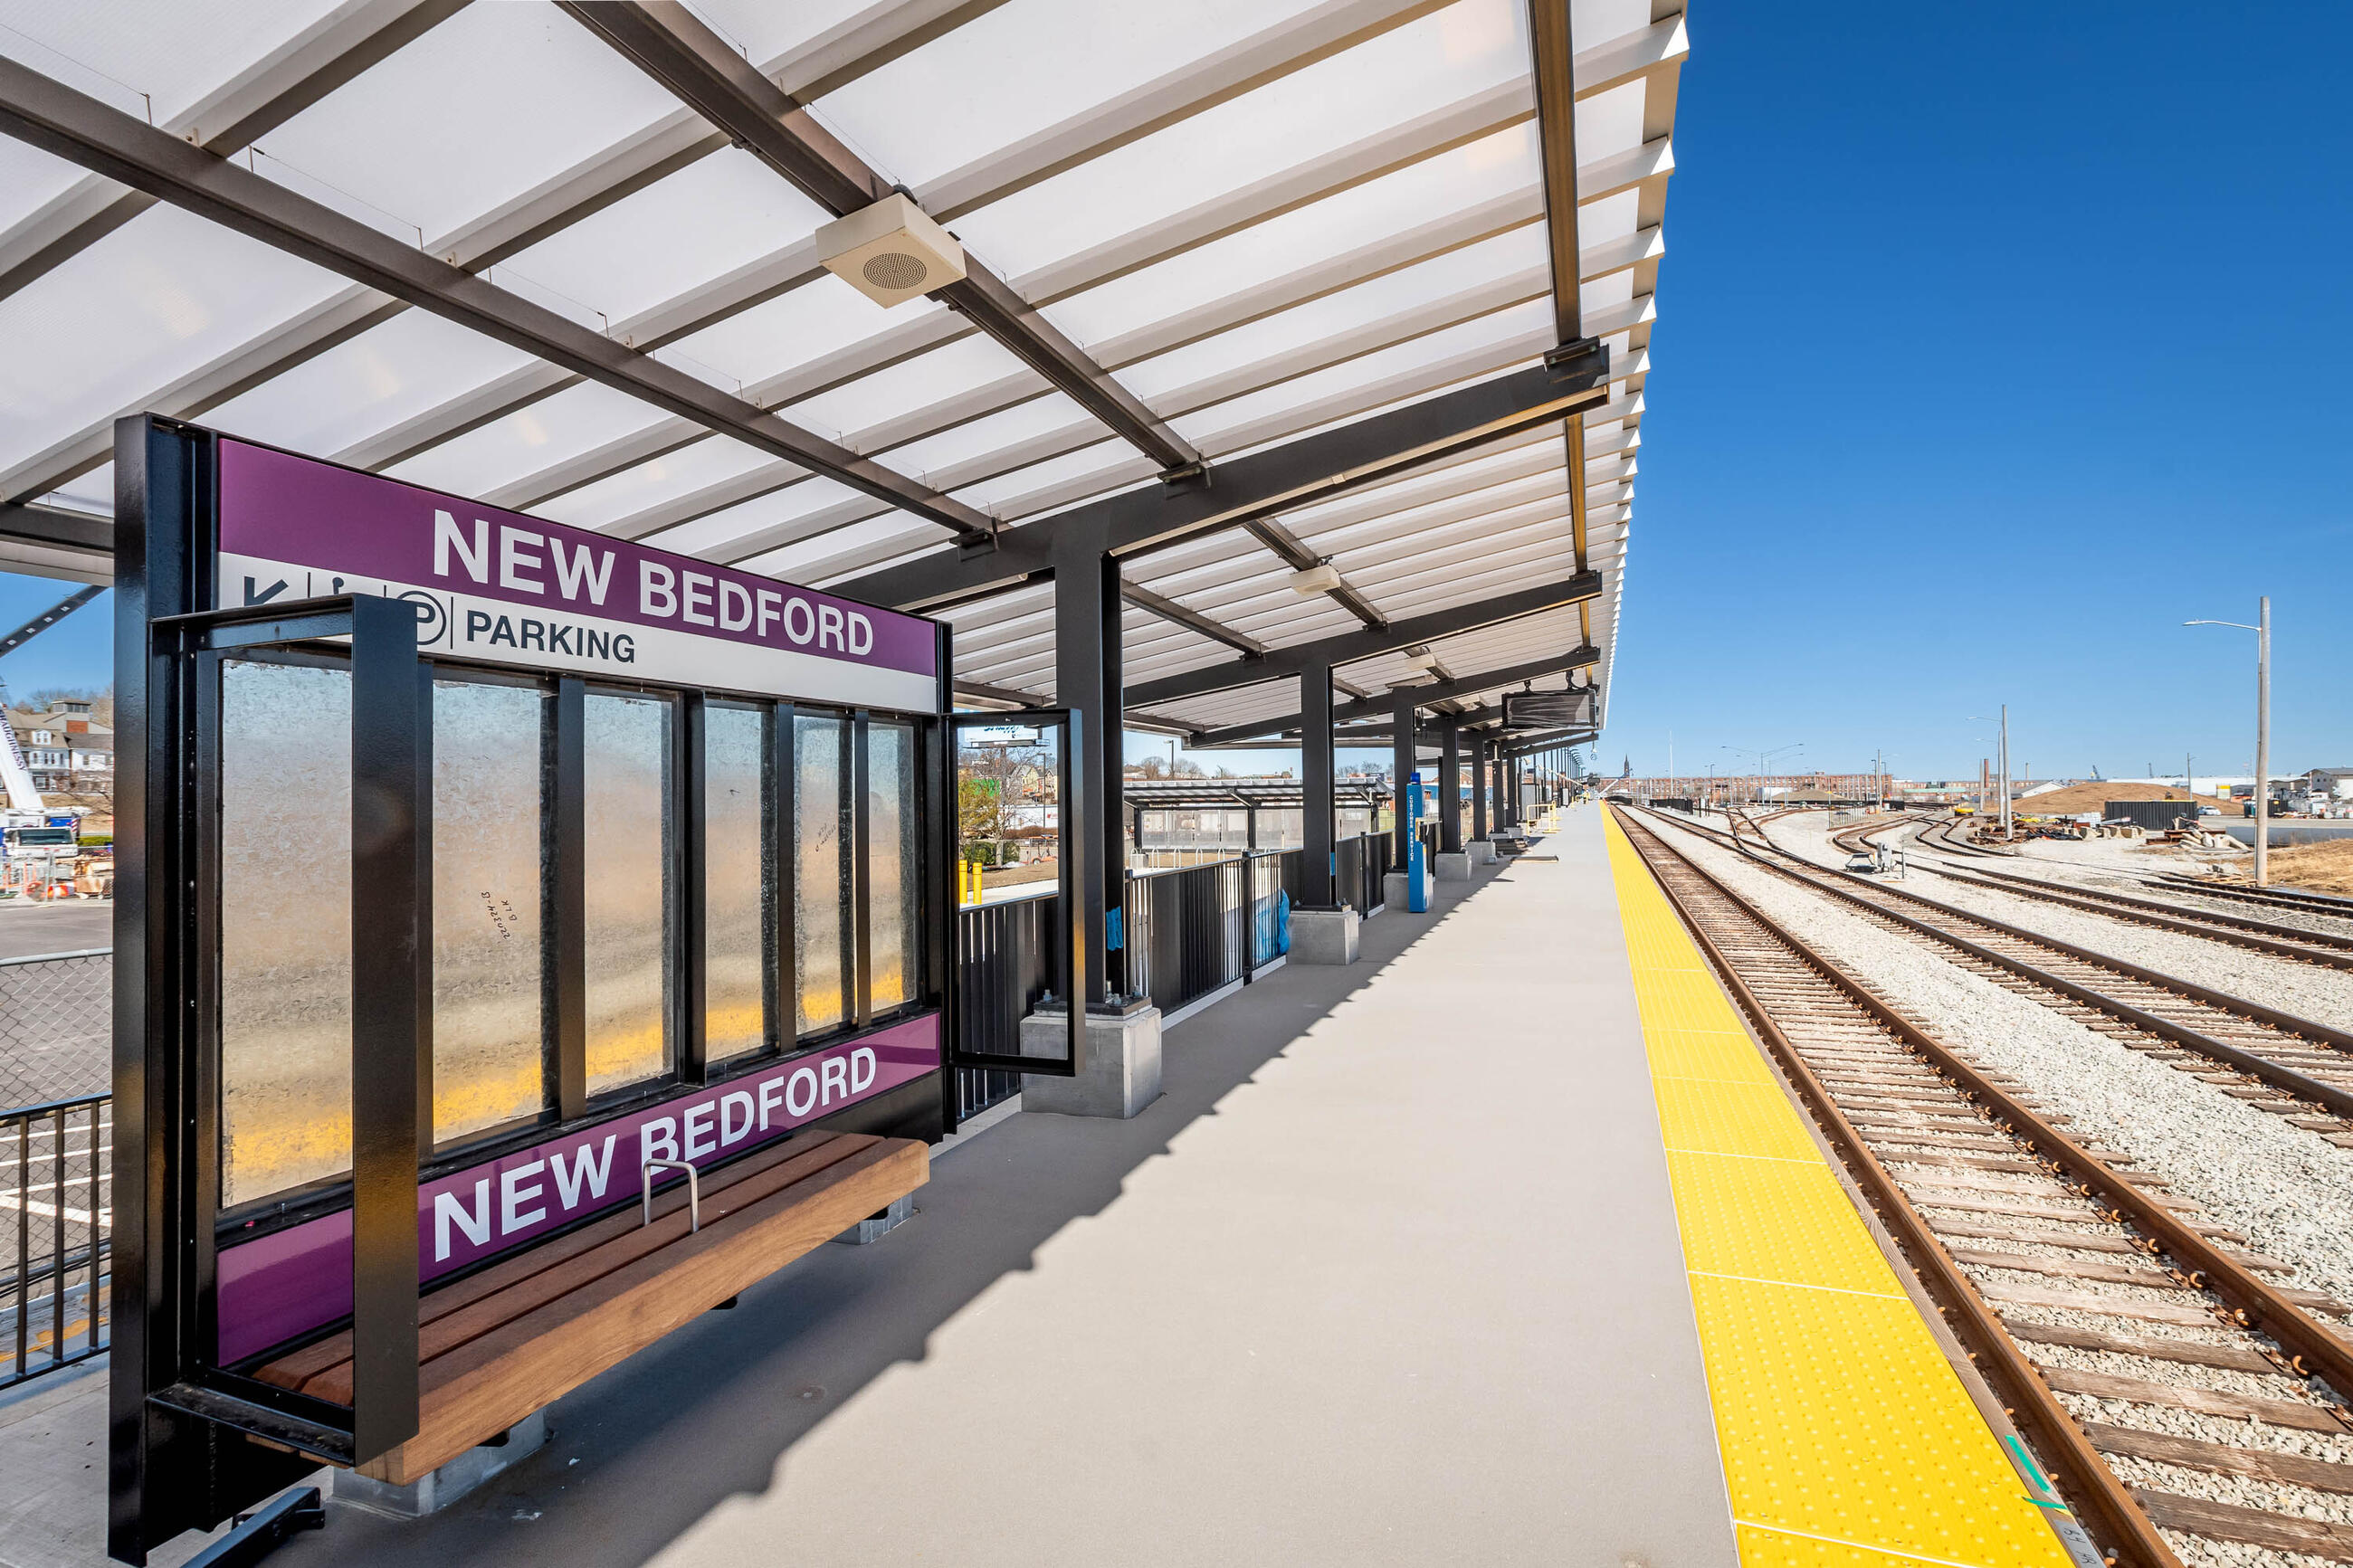 Newly renovated New Bedford station with station sign and platform with yellow tactile surface indicator 